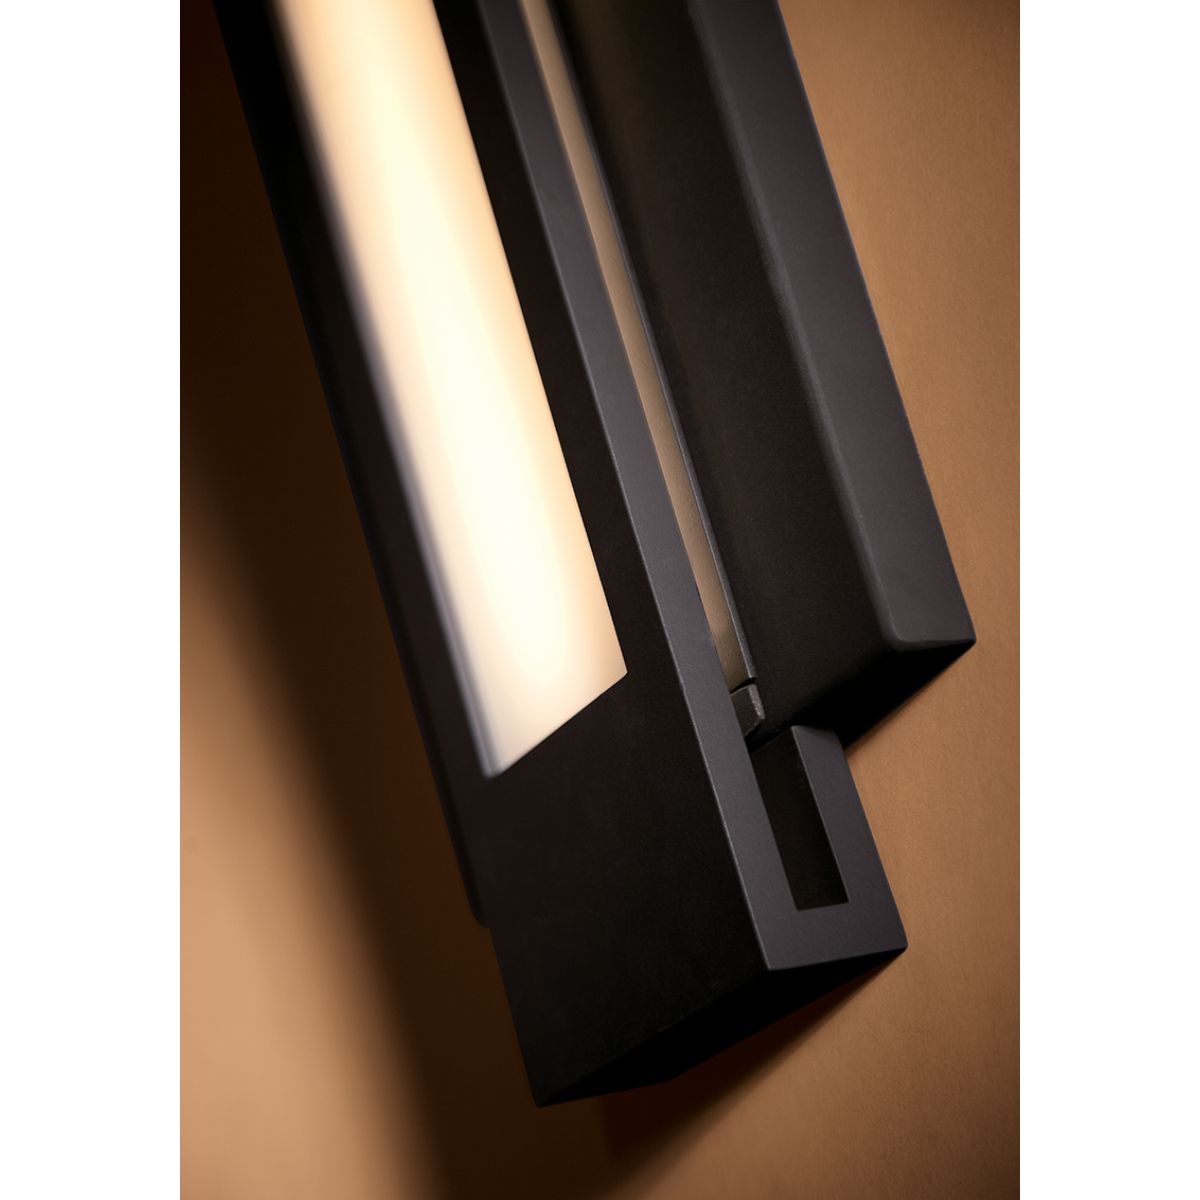 Insert 12 in. LED Outdoor Wall Sconce Bronze Finish